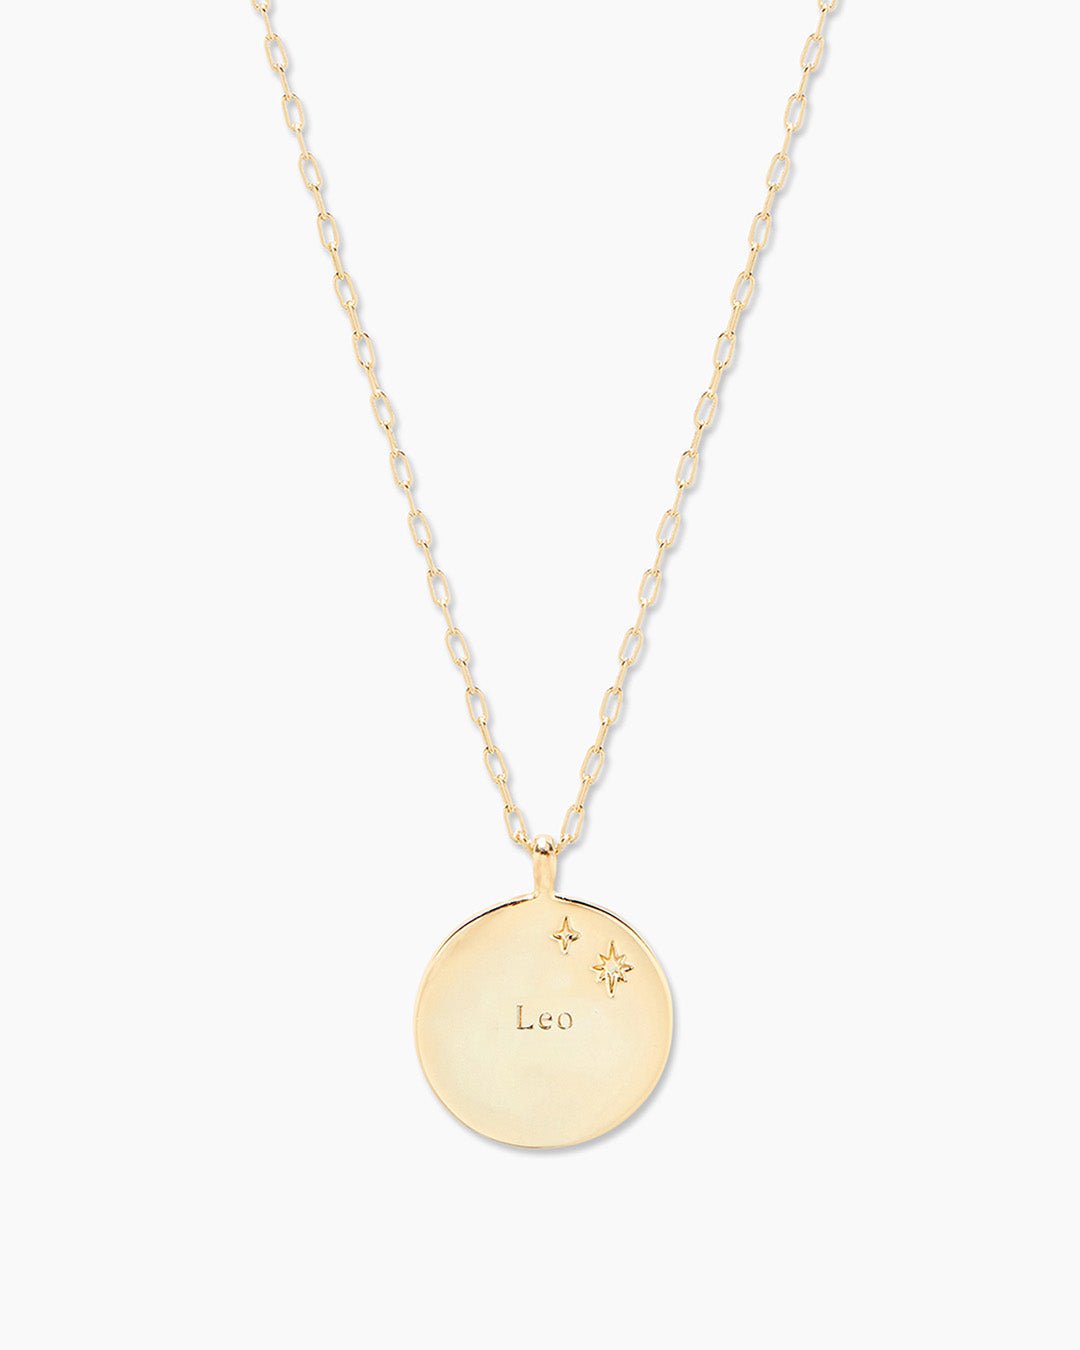 Zodiac Necklace - Leo,  Astrology Coin Necklace,  Leo Necklace   || option::Gold Plated, Leo